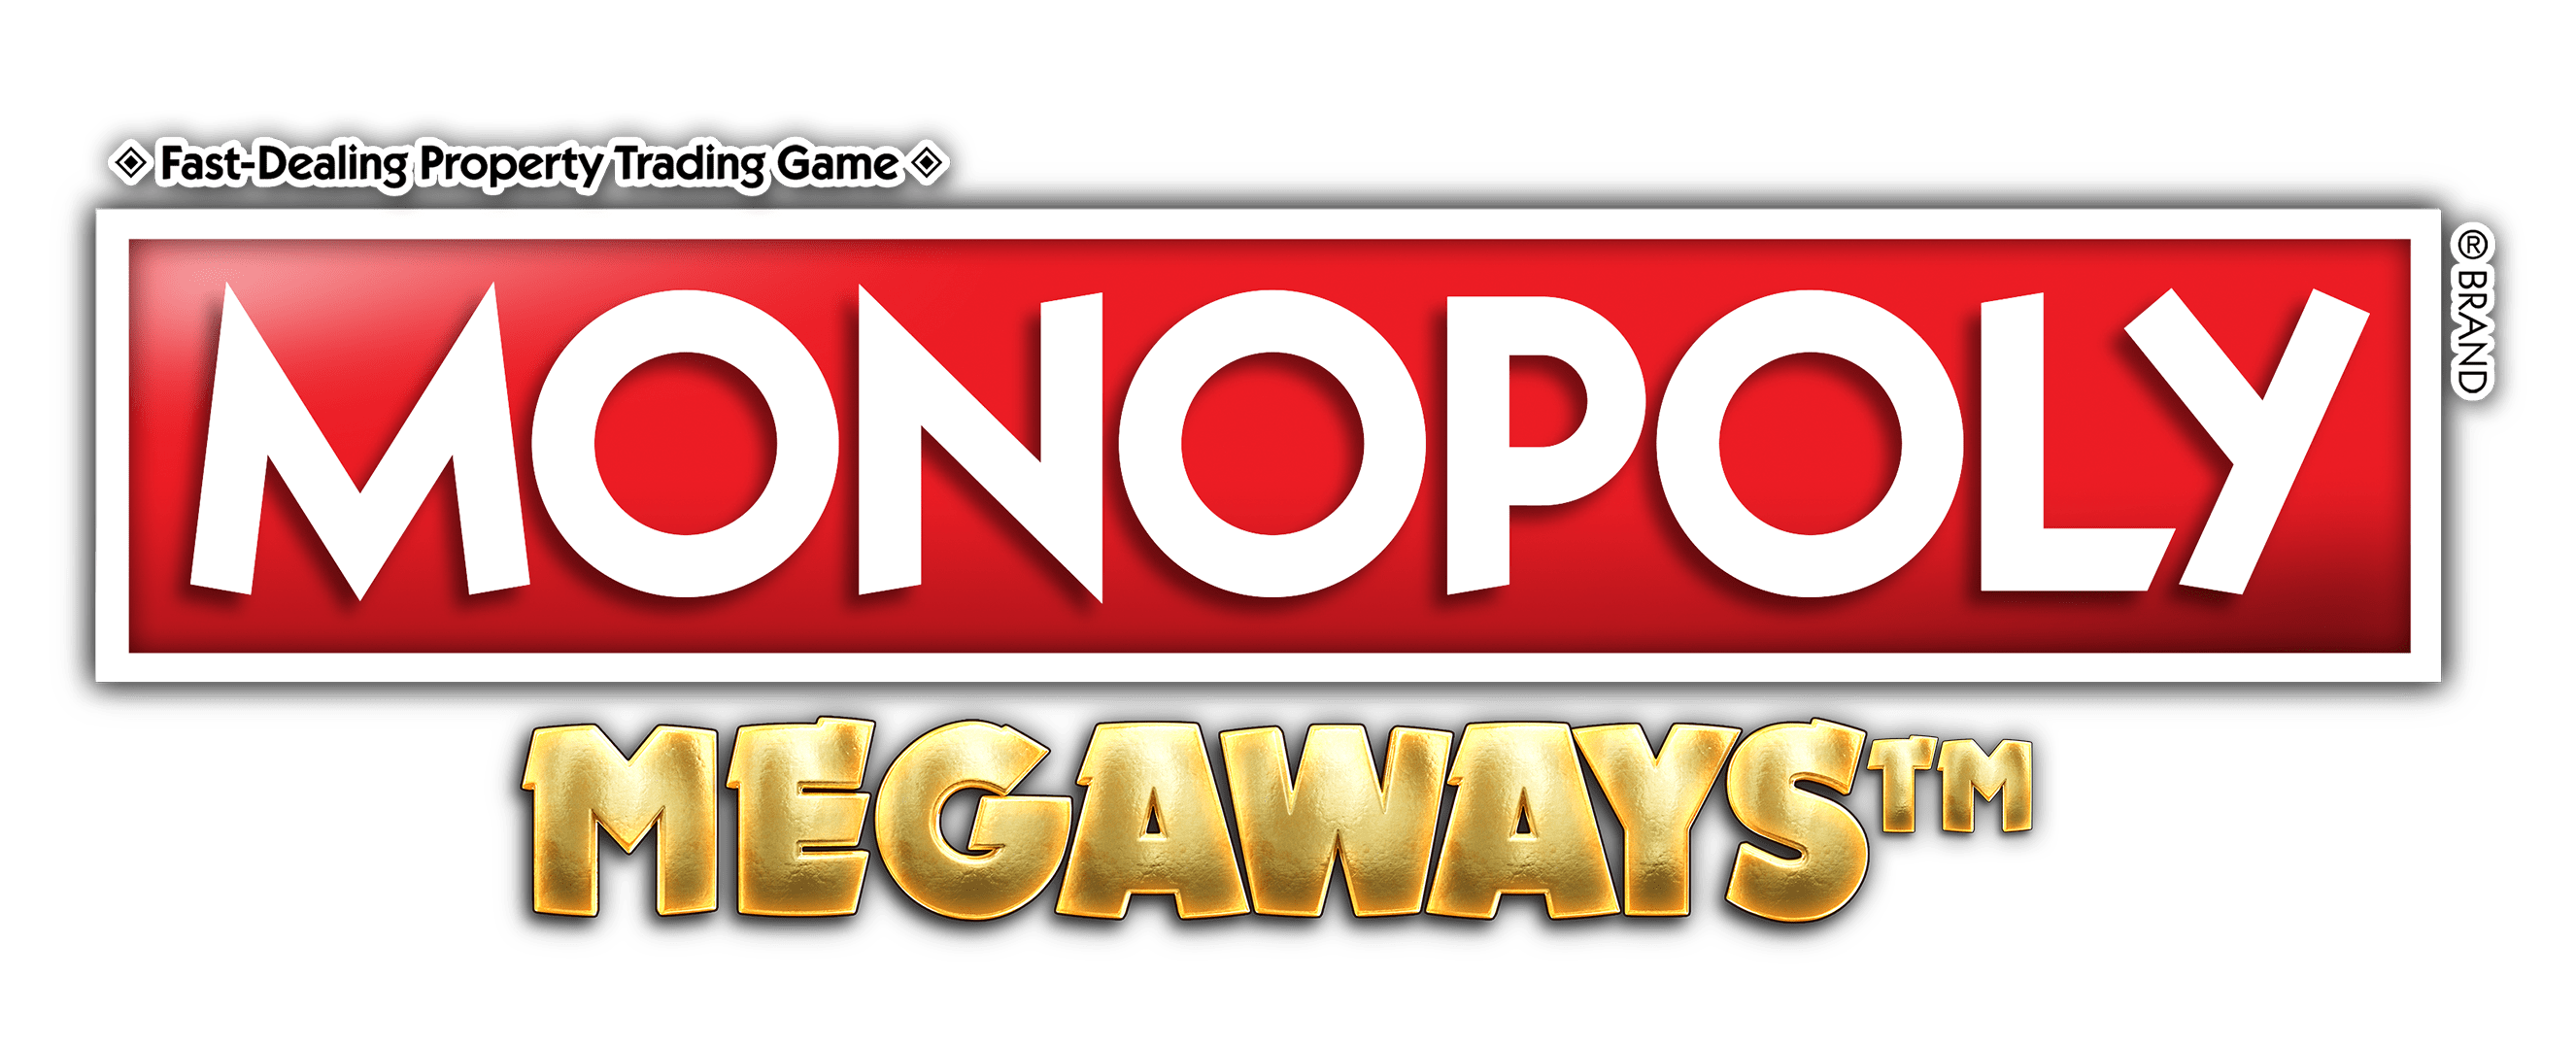 Monopoly slots online casino for fun